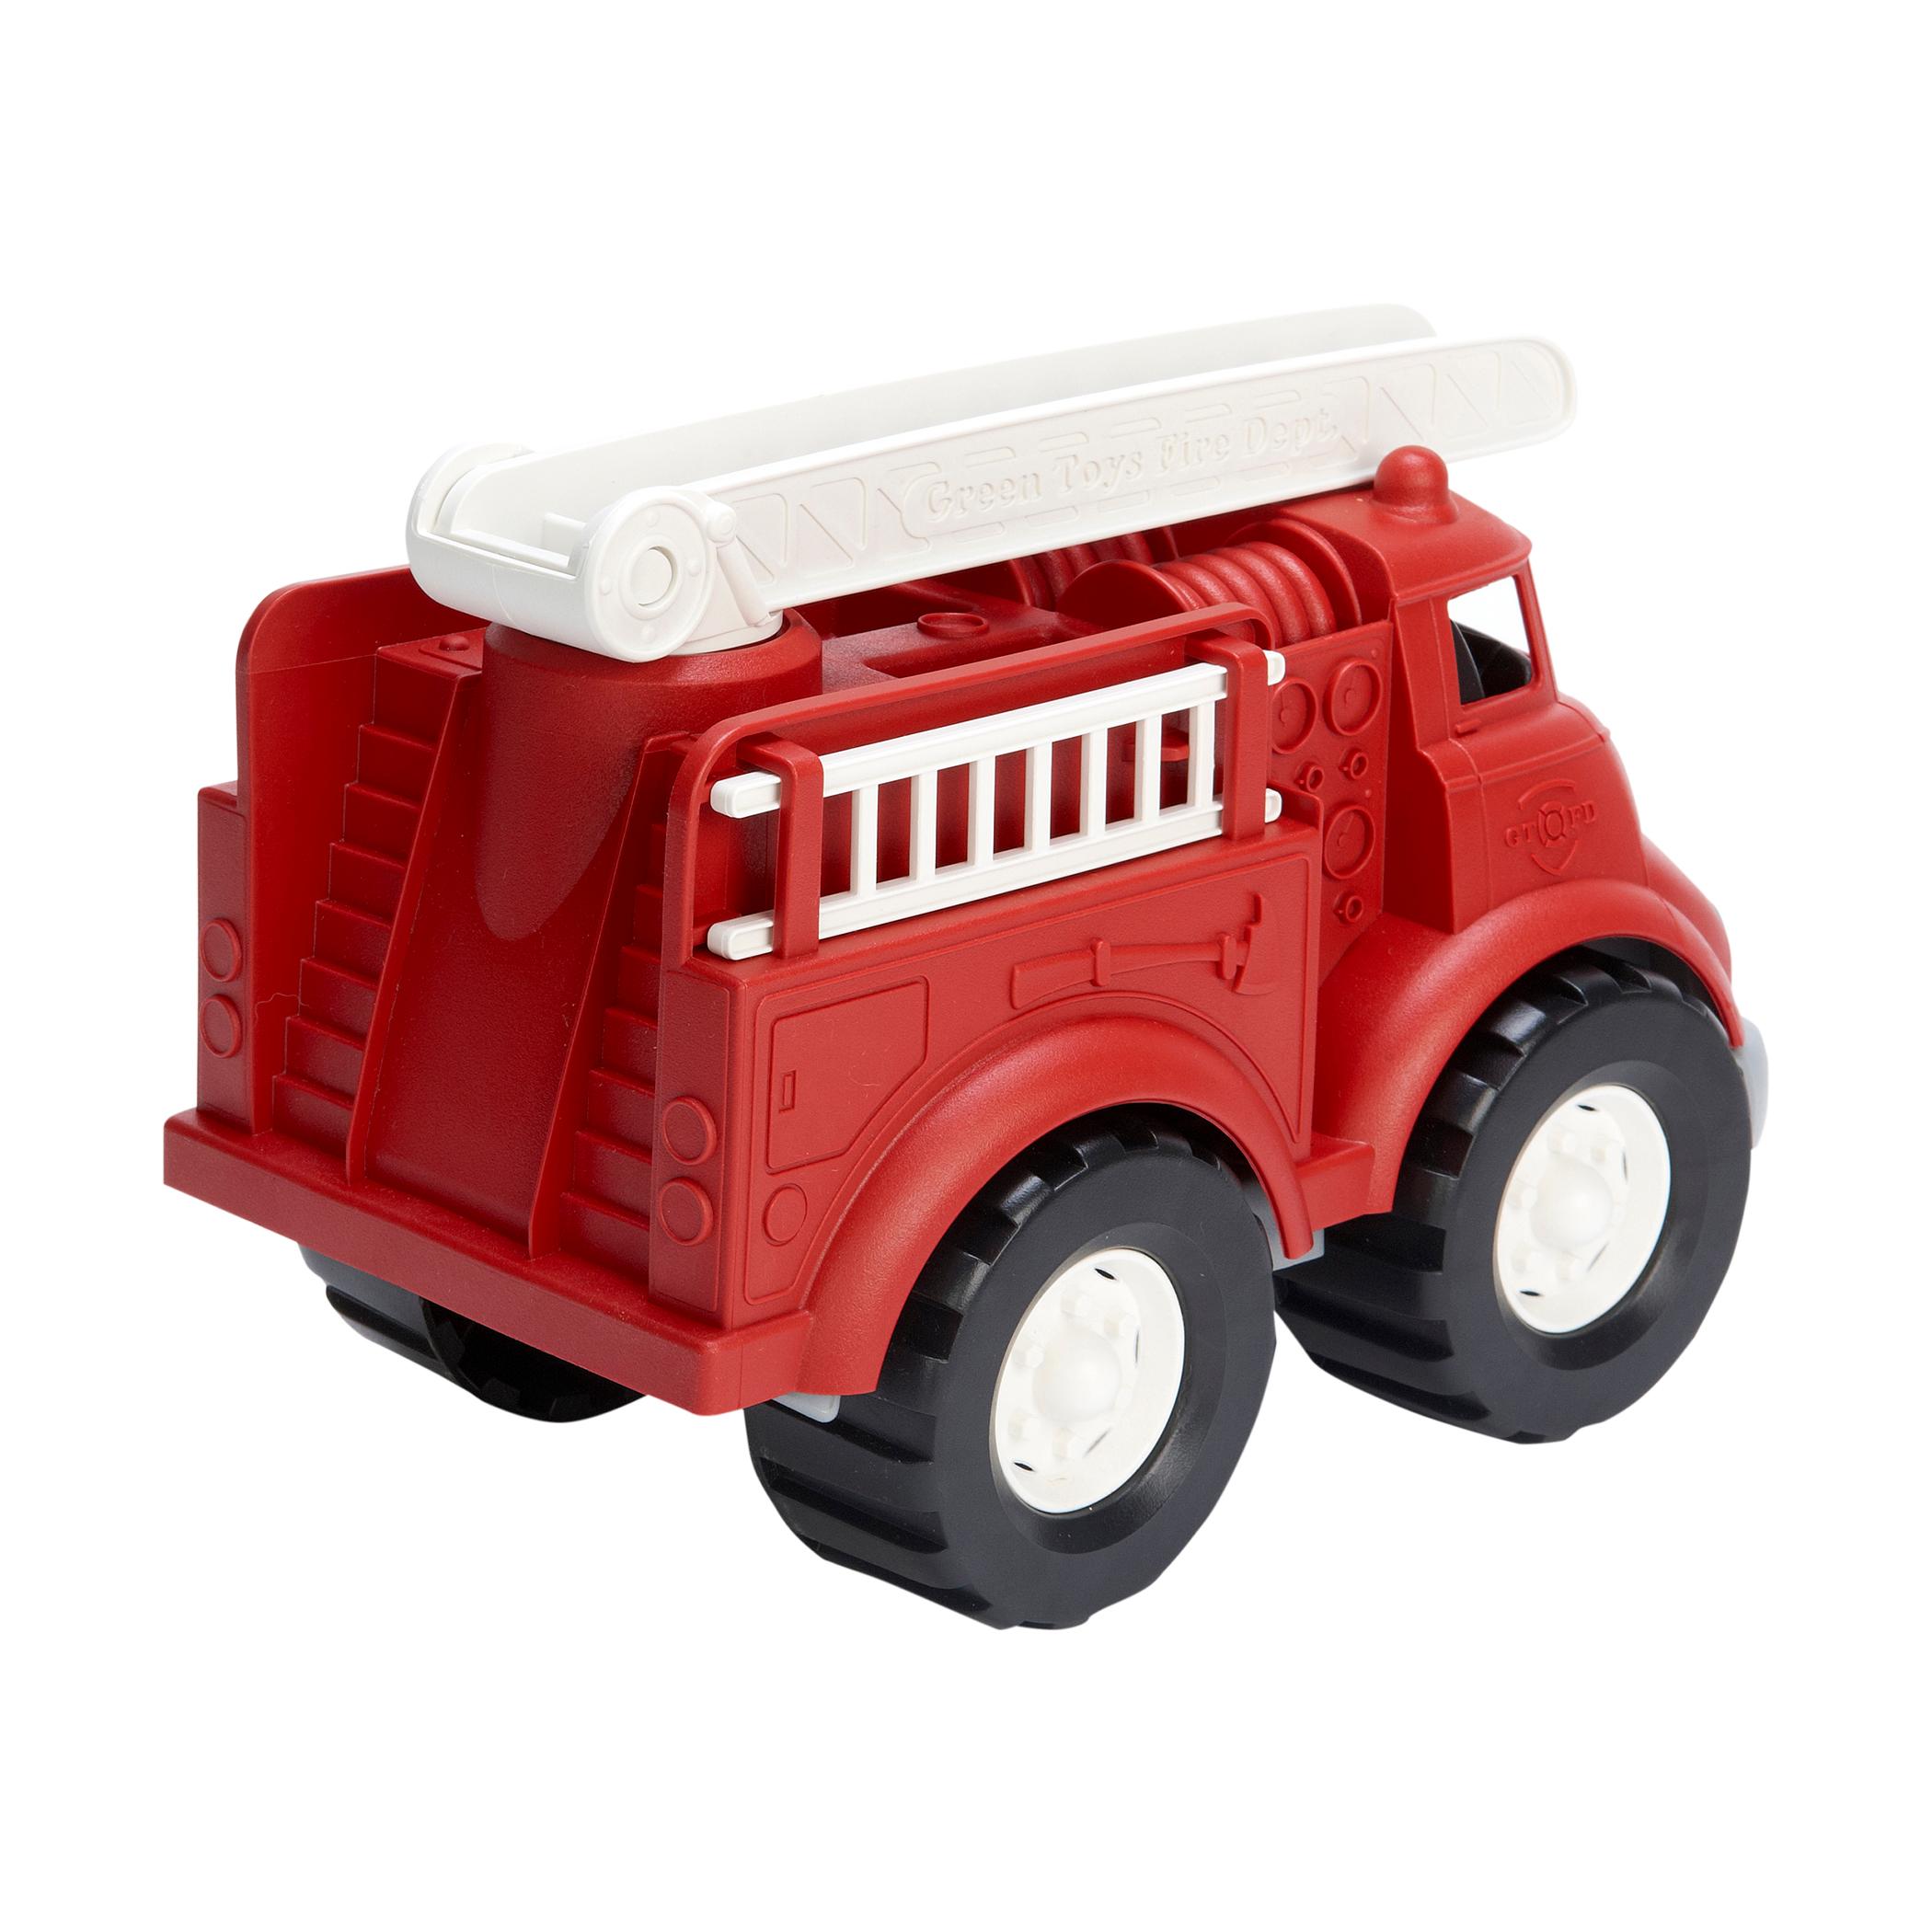 Recycled Plastic Fire Truck Toy